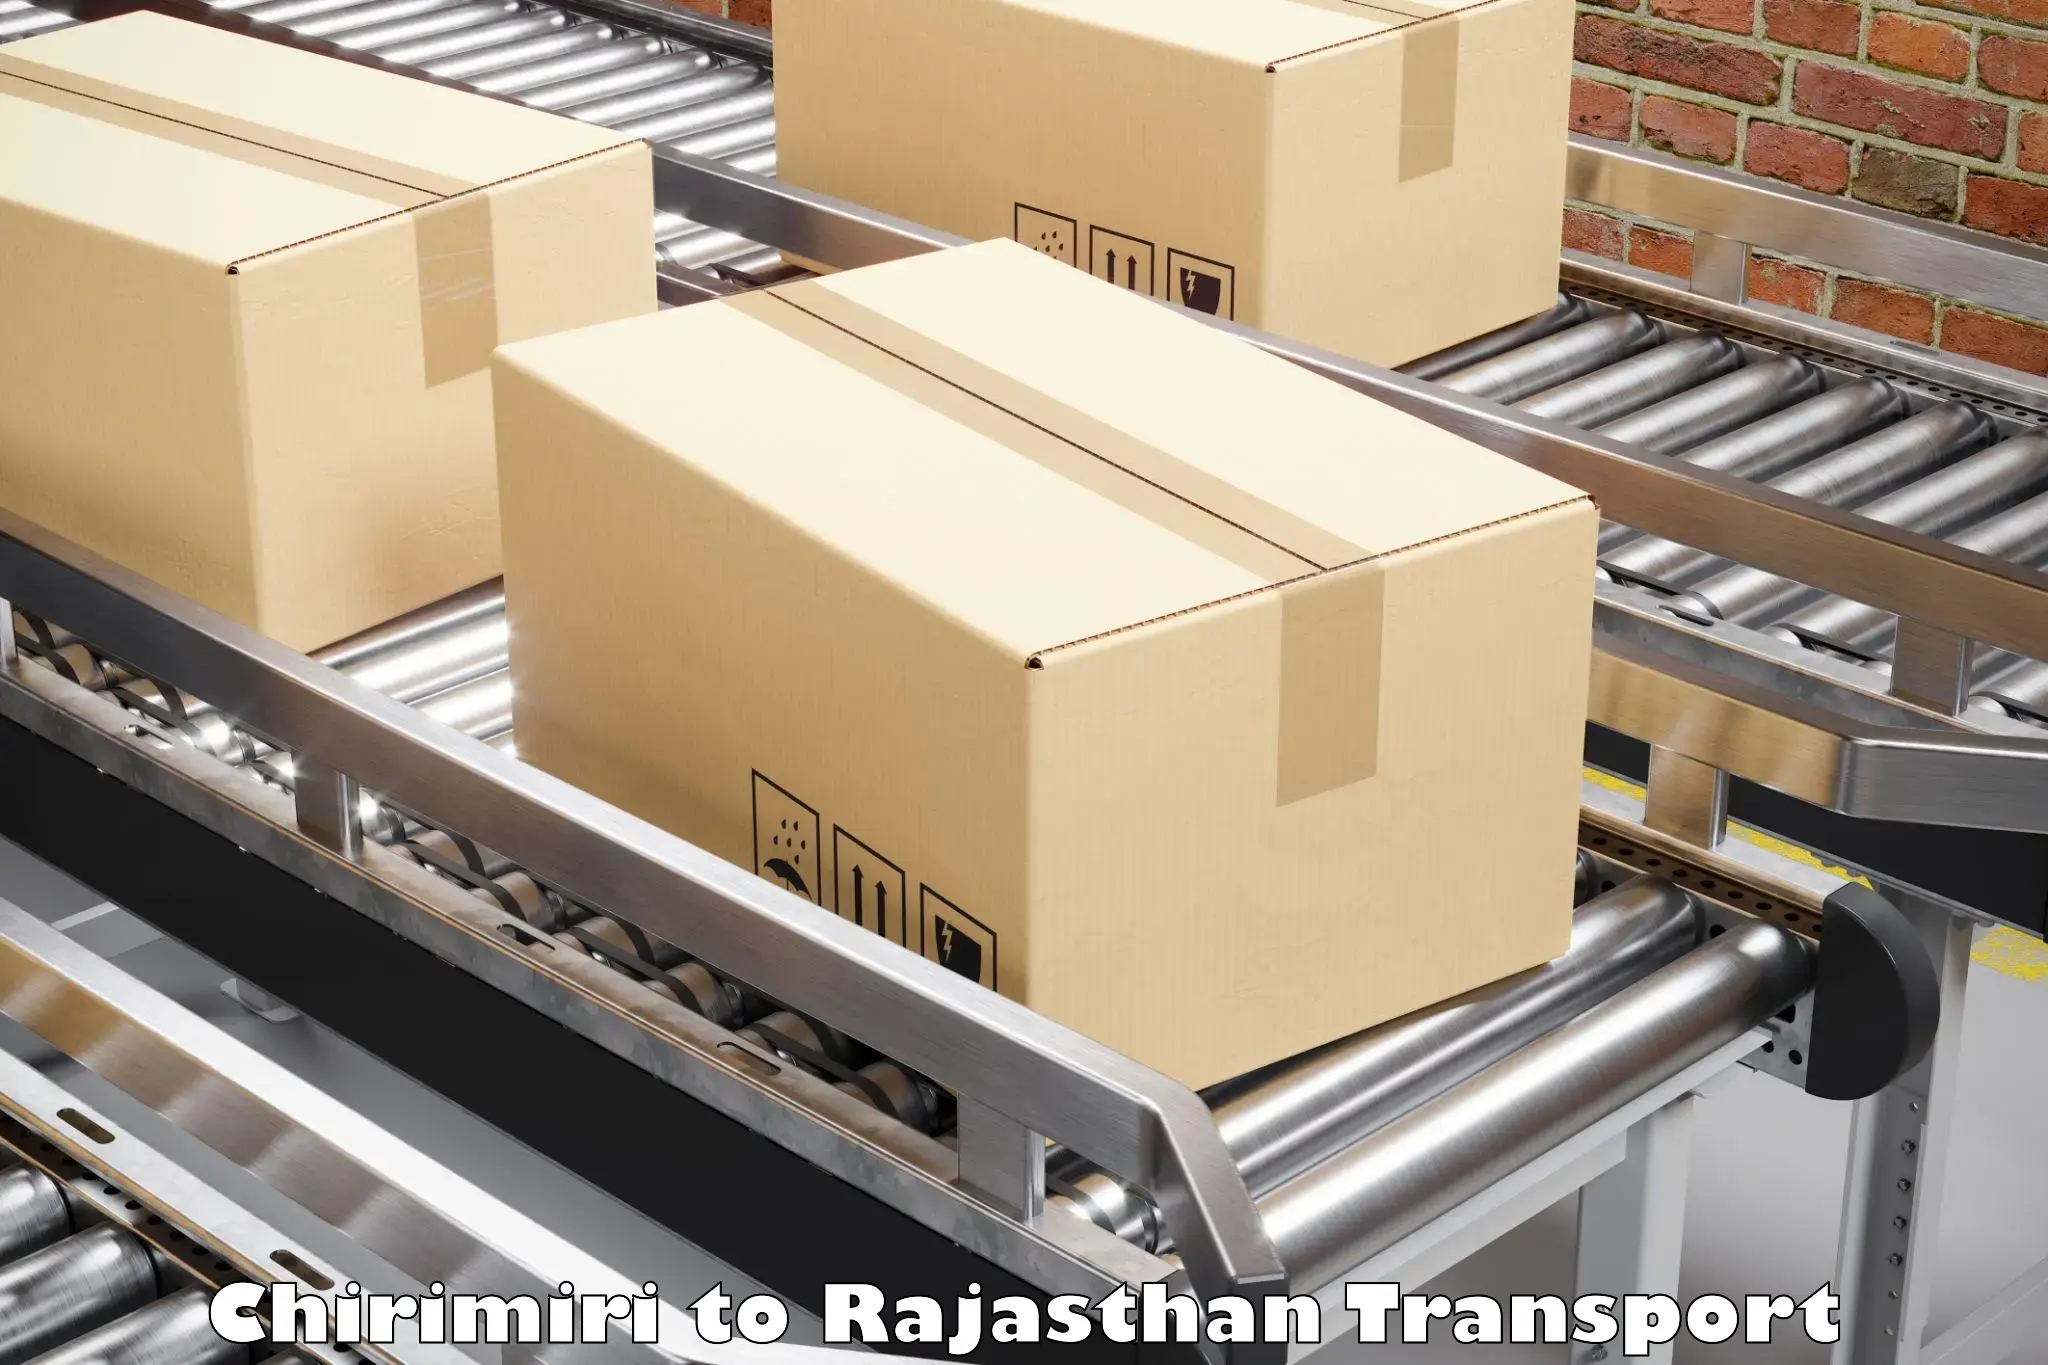 Road transport online services in Chirimiri to Rajasthan